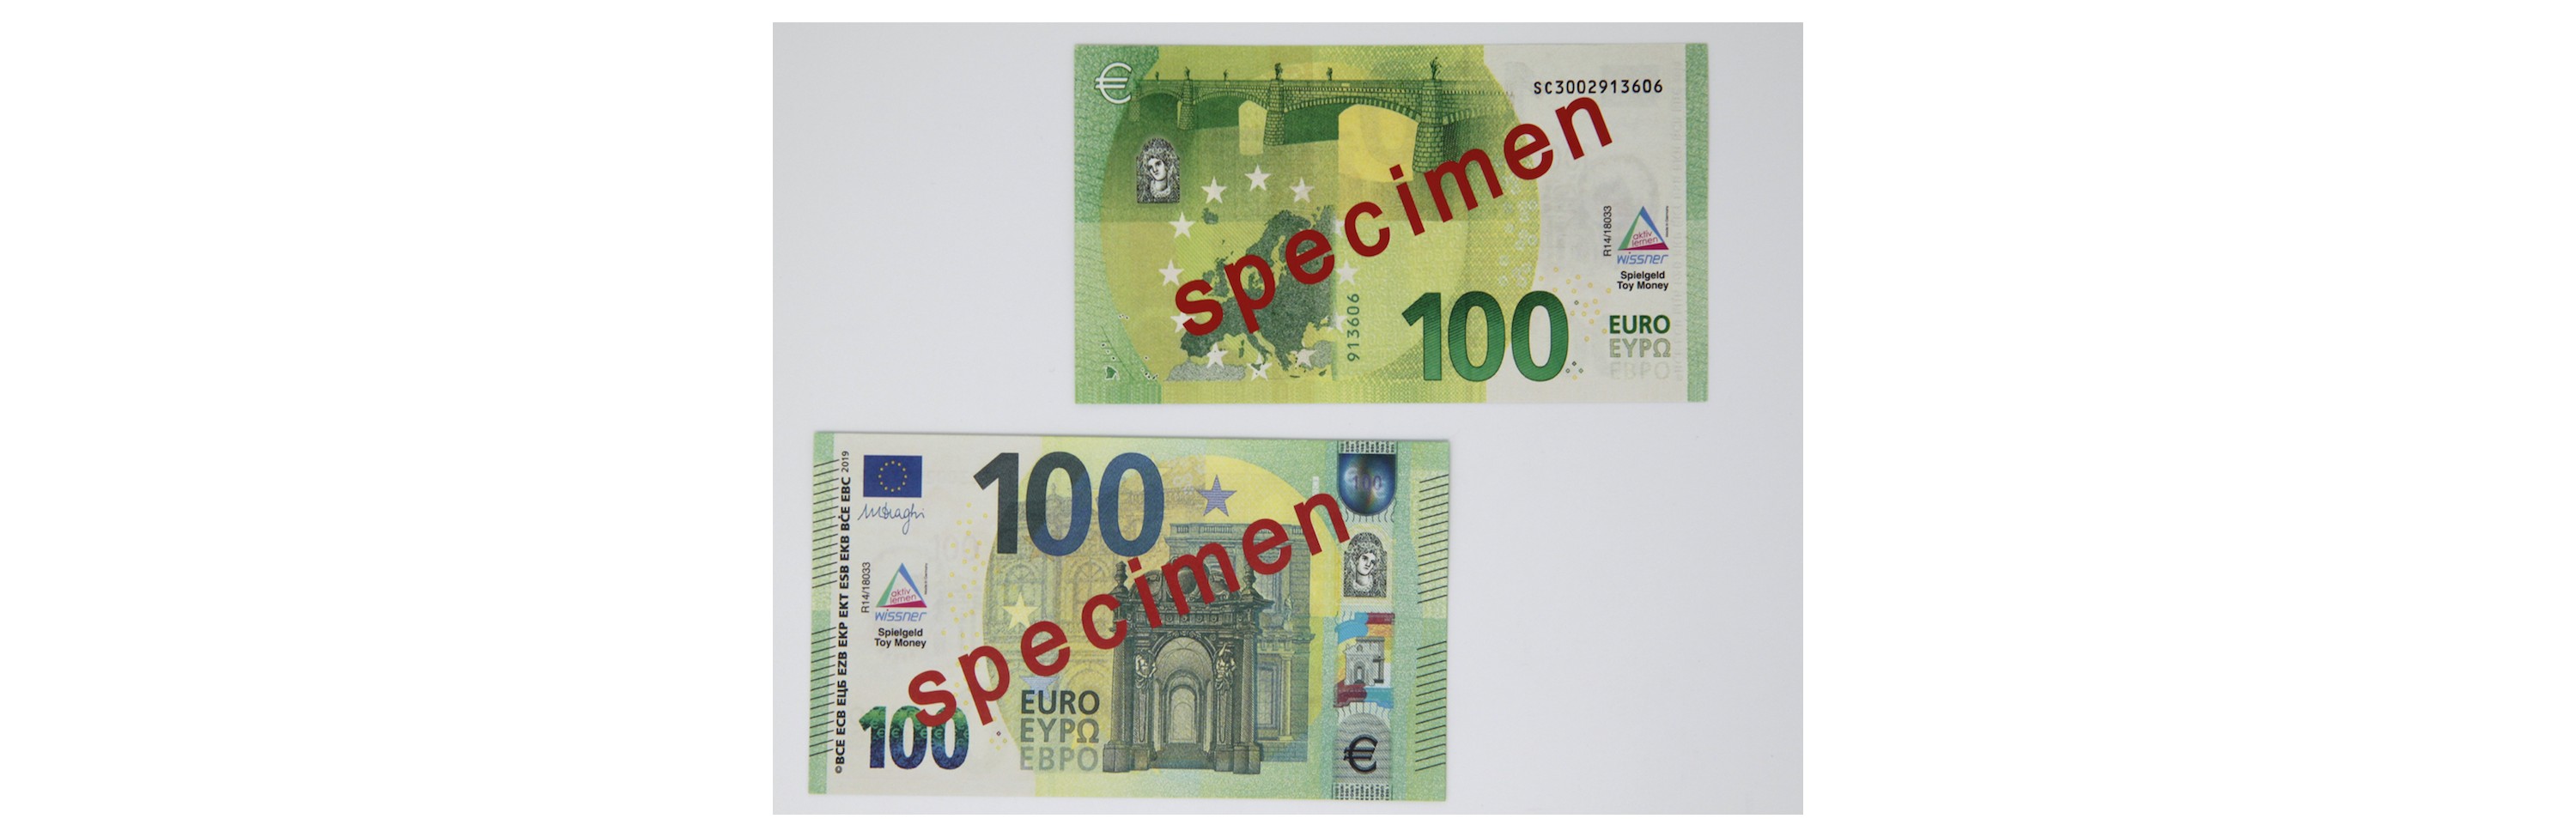 Wissner® active learning - 100 Euro - notes (100 pcs)